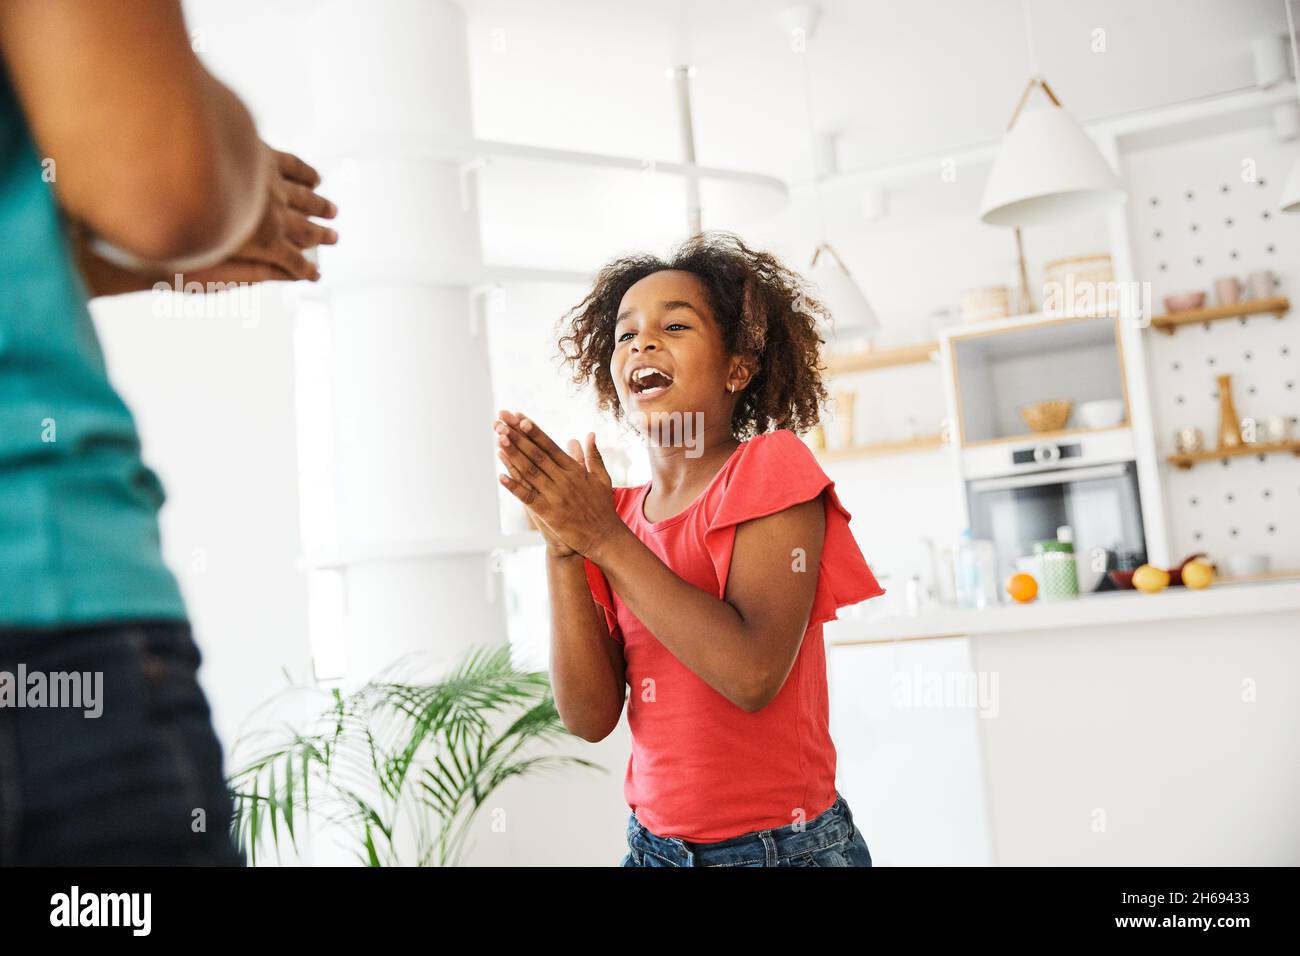 child daughter father family happy playing kid childhood dancing parent home woman girl bonding fun cheerful Stock Photo